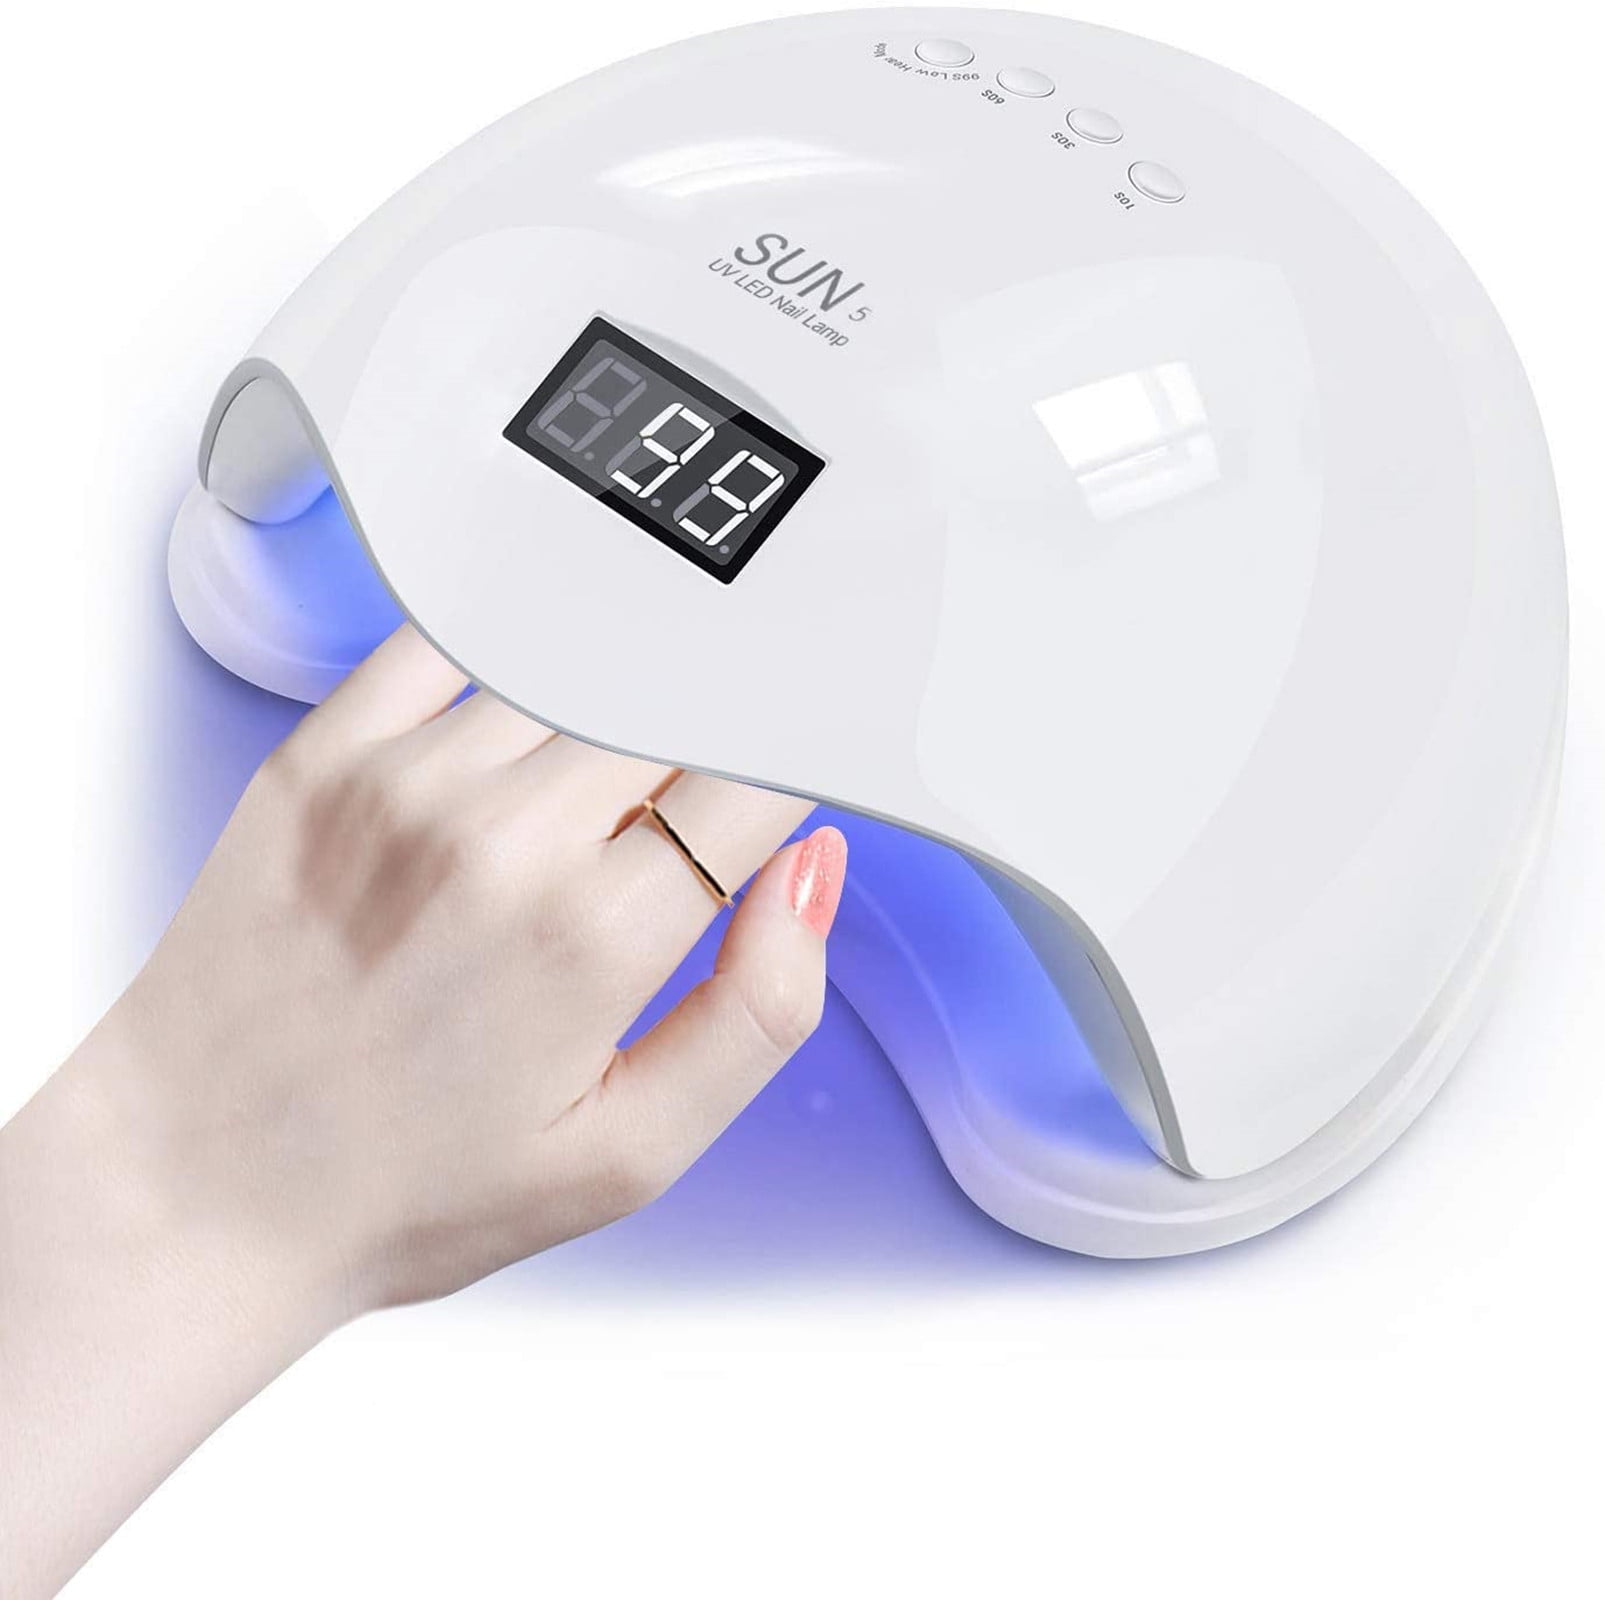 SUNUV SUNUV 36W UV LED Nail Lamp Dryer for Gel Nail Polish Curing Manicure/Pedicure  with 10s/30s/60s/99s Timer & Bottom Tray LCD Display Screen SUN5 :  Amazon.in: Beauty